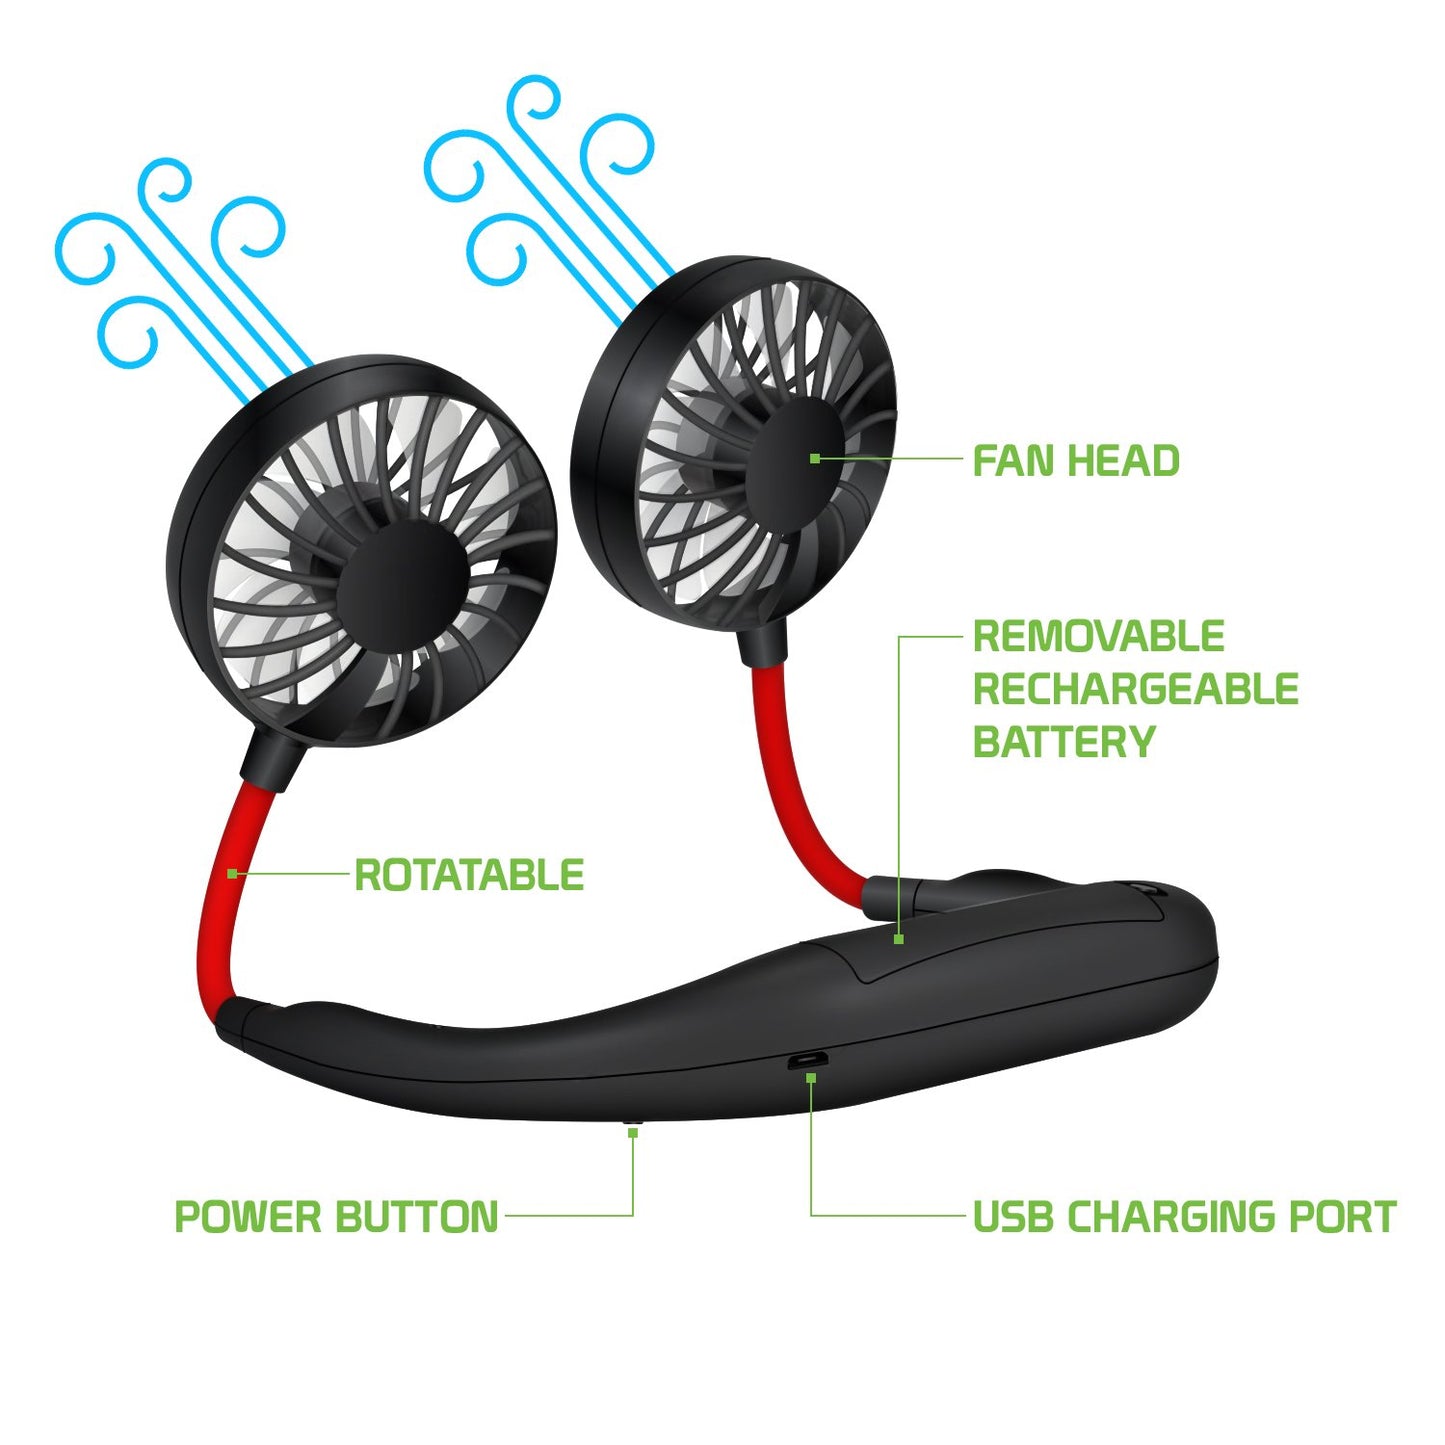 FANNECBK- Cellet Portable Hands-free USB Rechargeable Neck Fan with 3 Speed Control and 360 Degree Rotation for Camping and Other Outdoor Activities